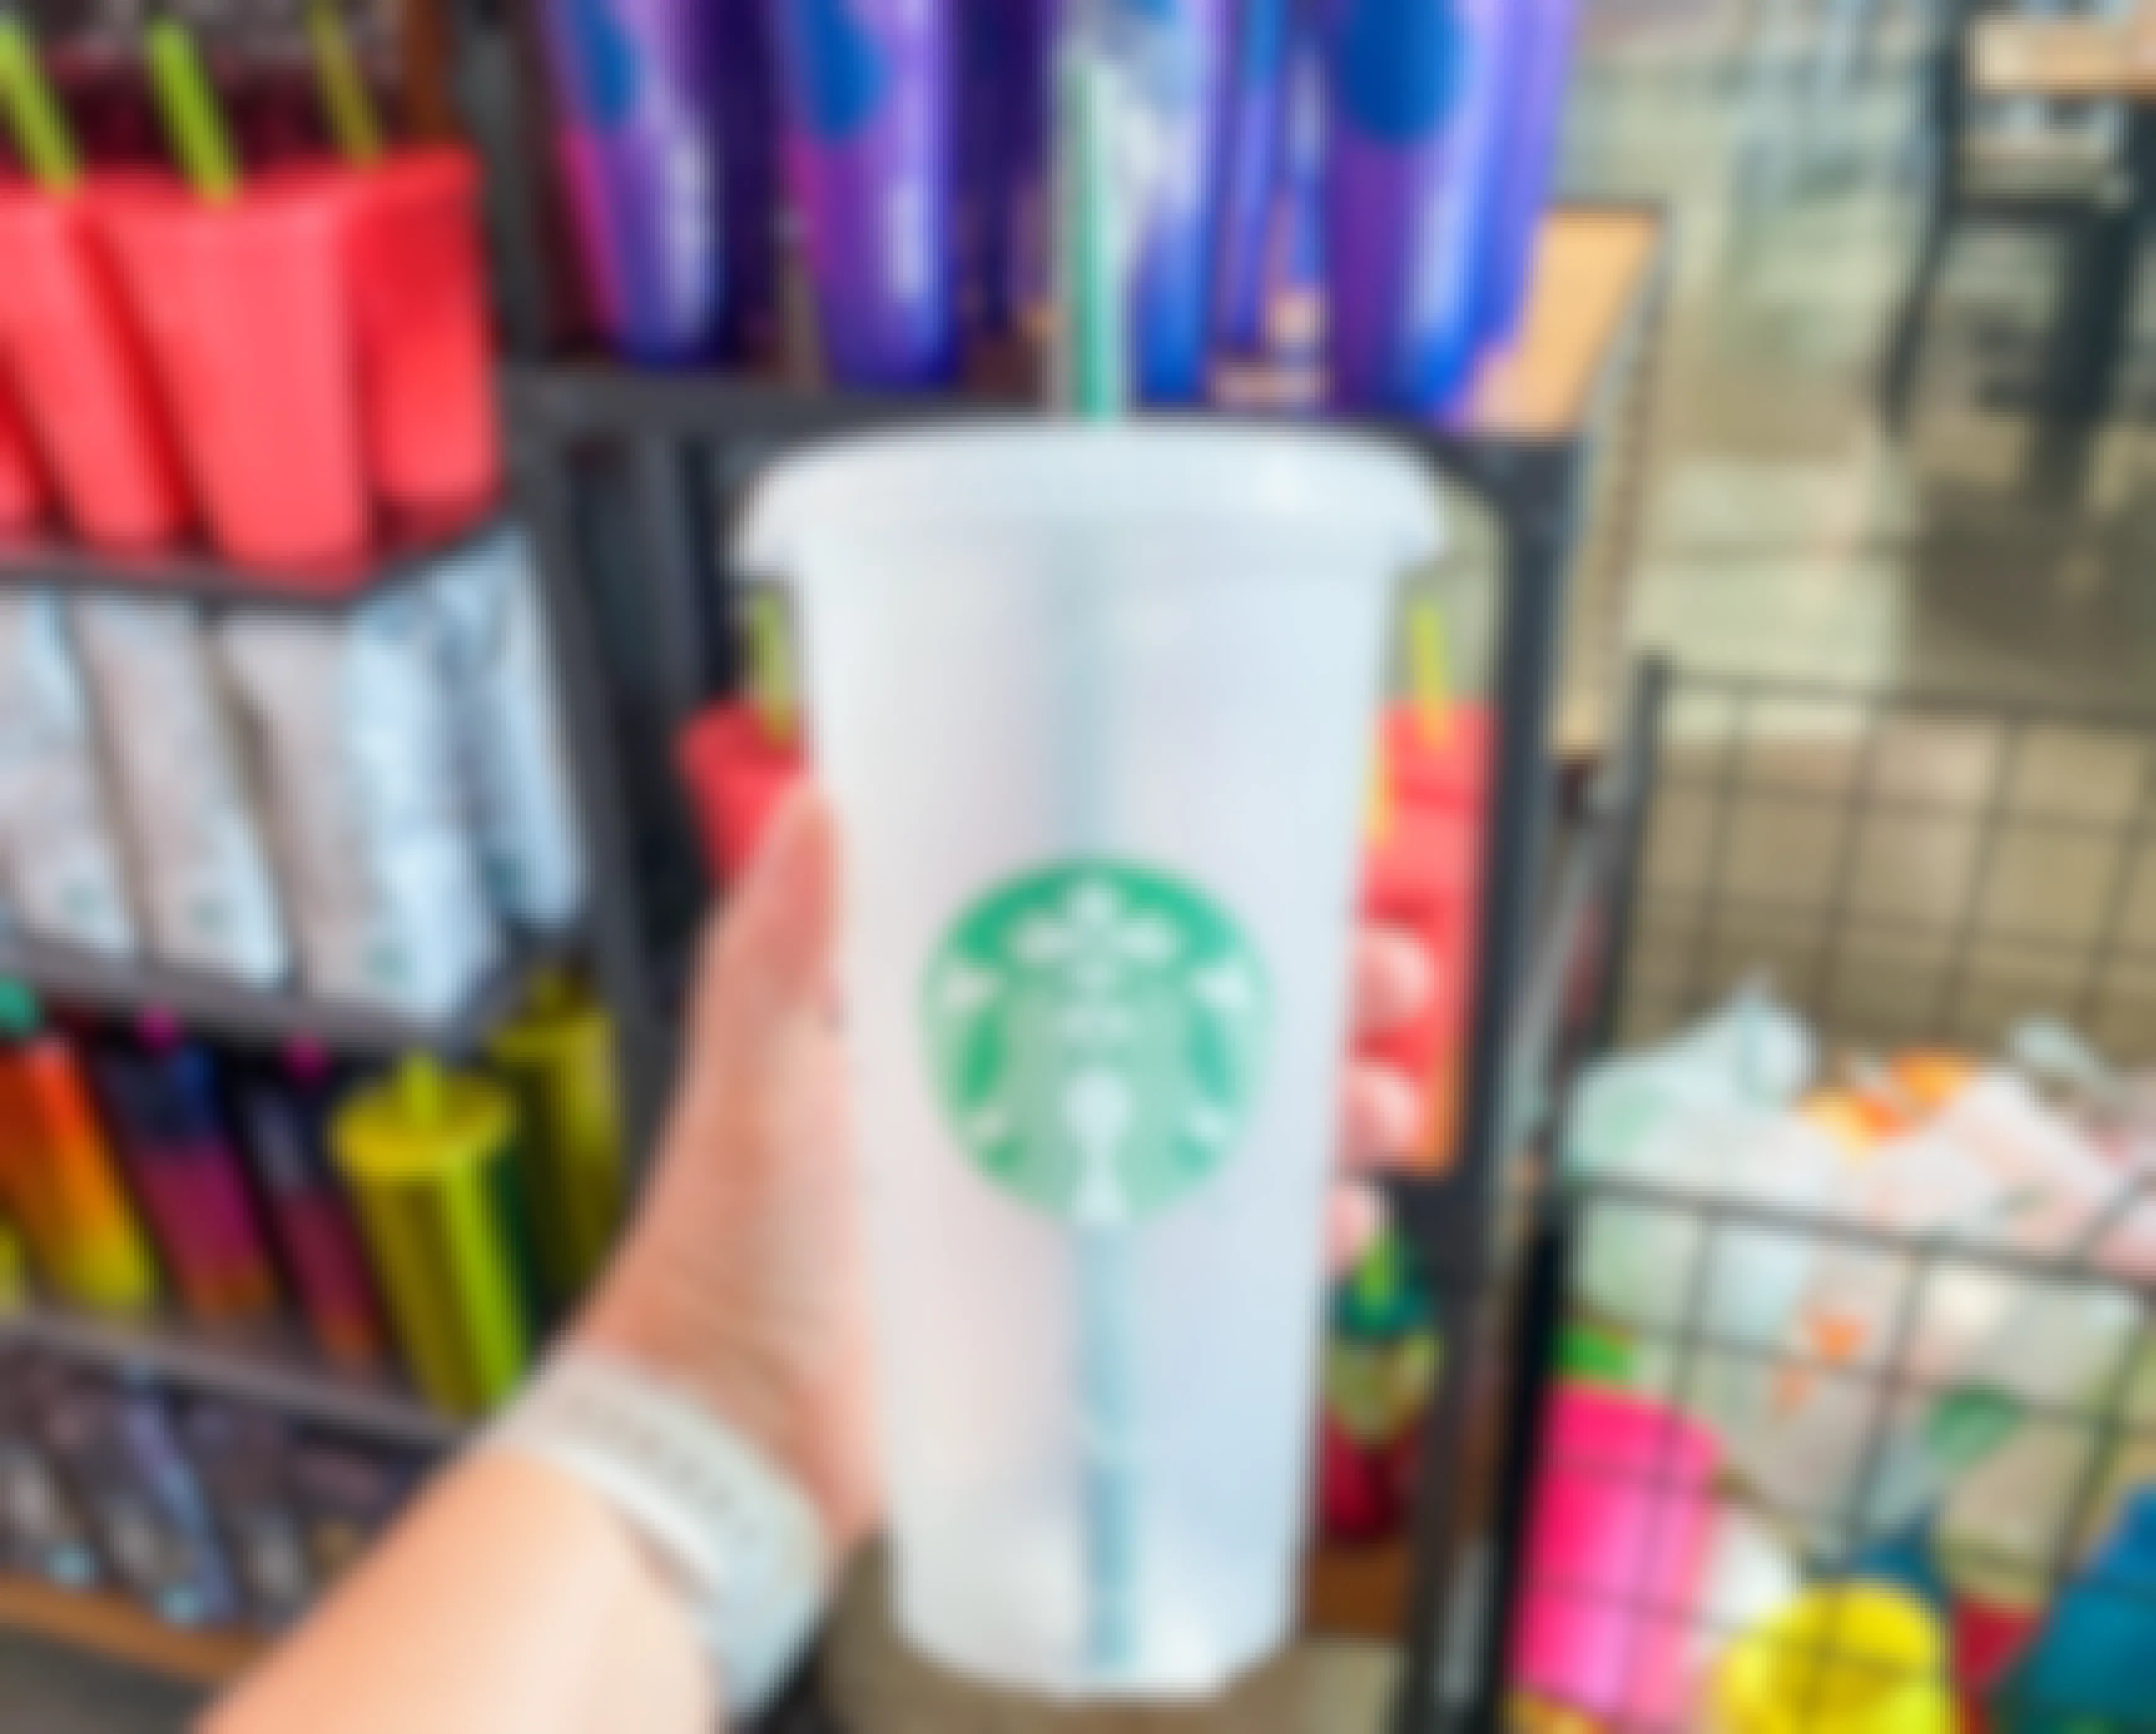 A person's hand holding up a reuasble Starbucks tumbler cup in front of a shelf of more cups.